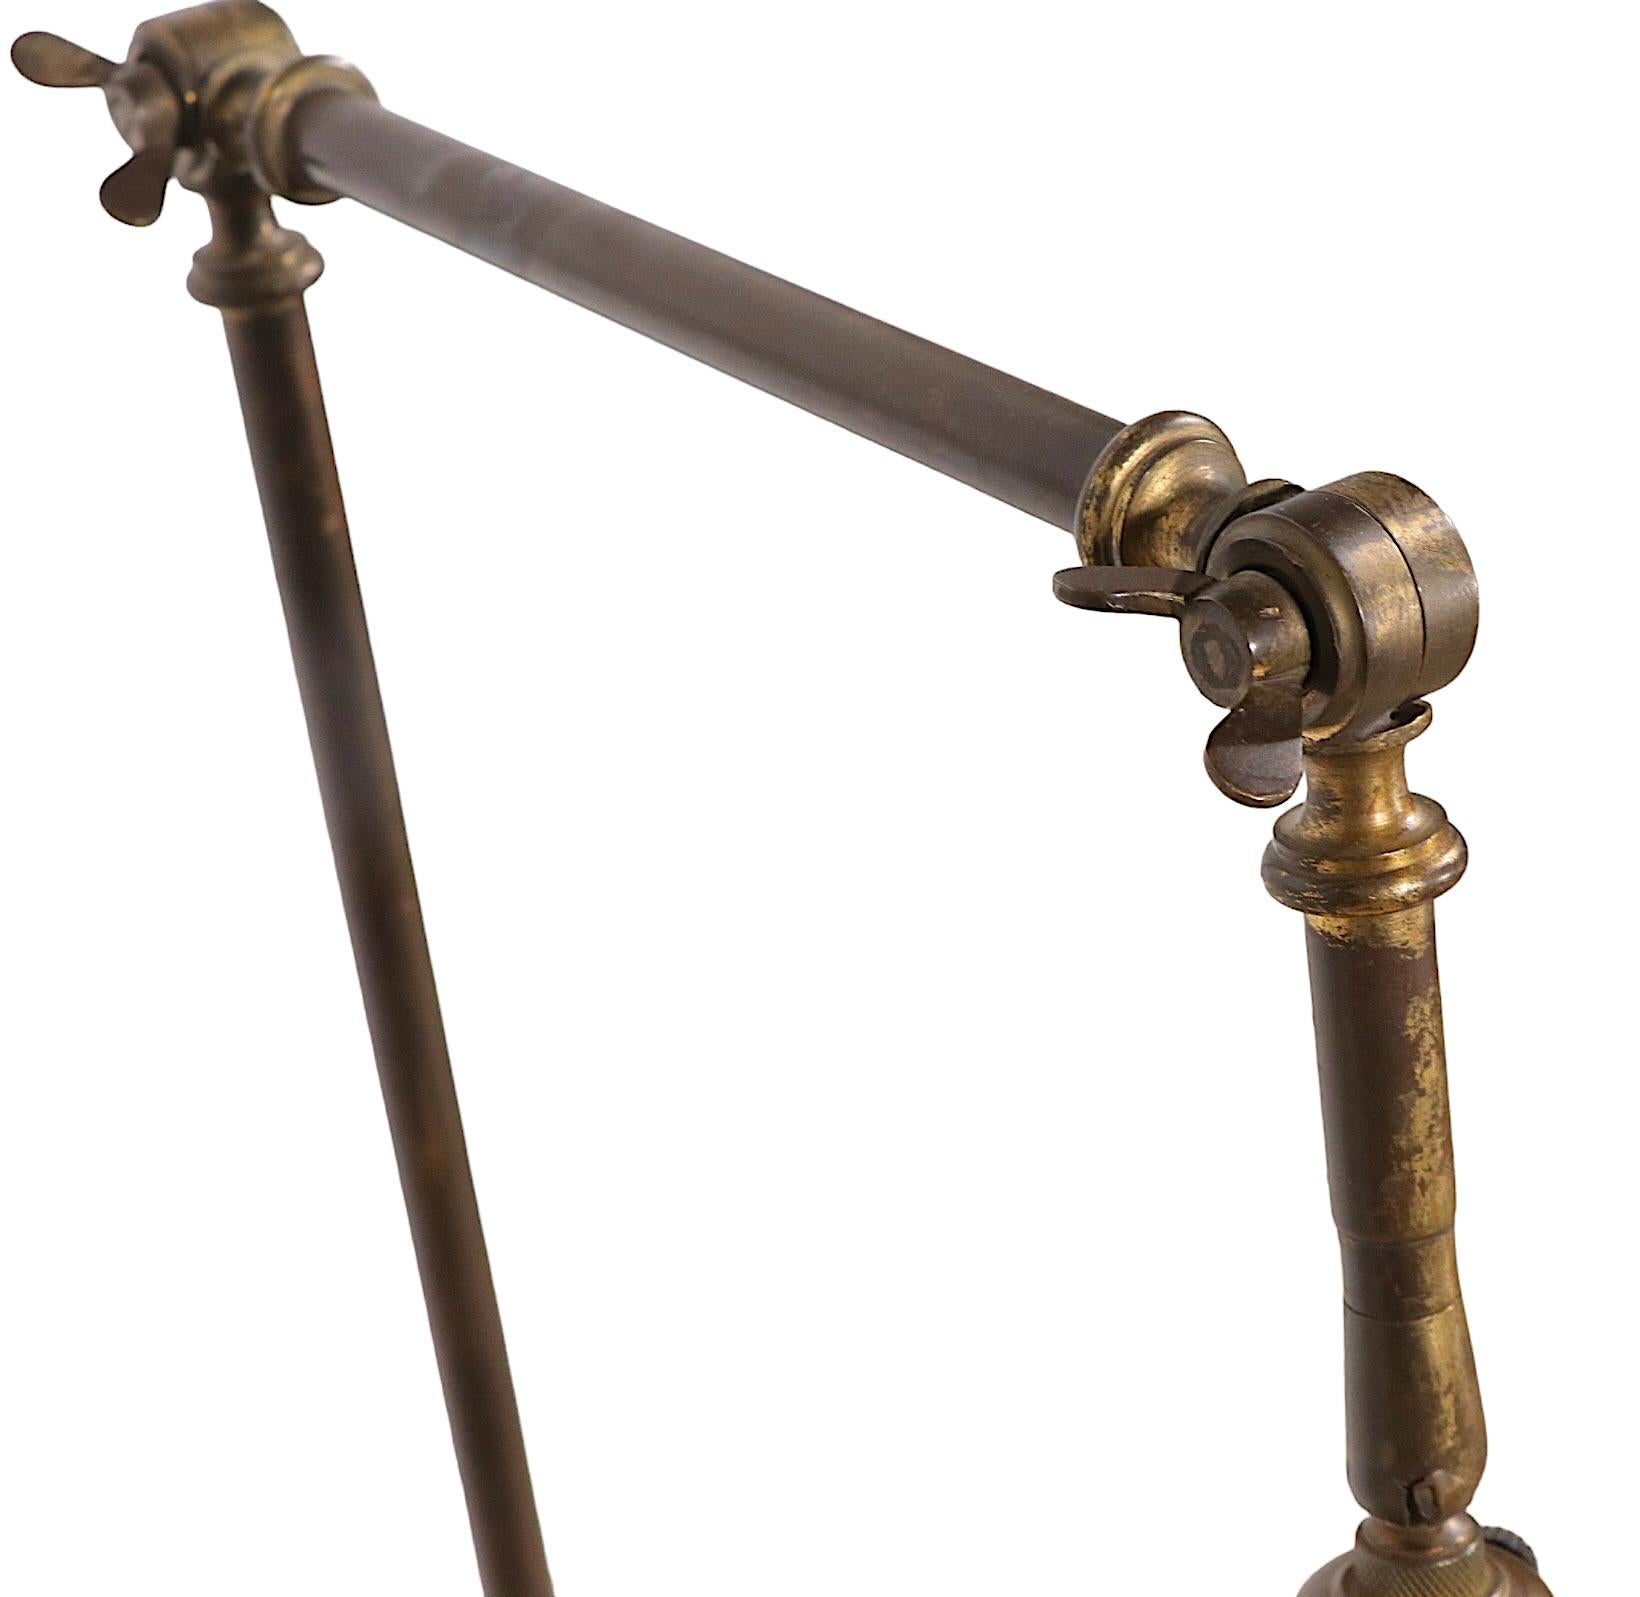 Articulating Brass Reading Floor Lamp in the Classical Style, C. 1900- 1930's For Sale 3